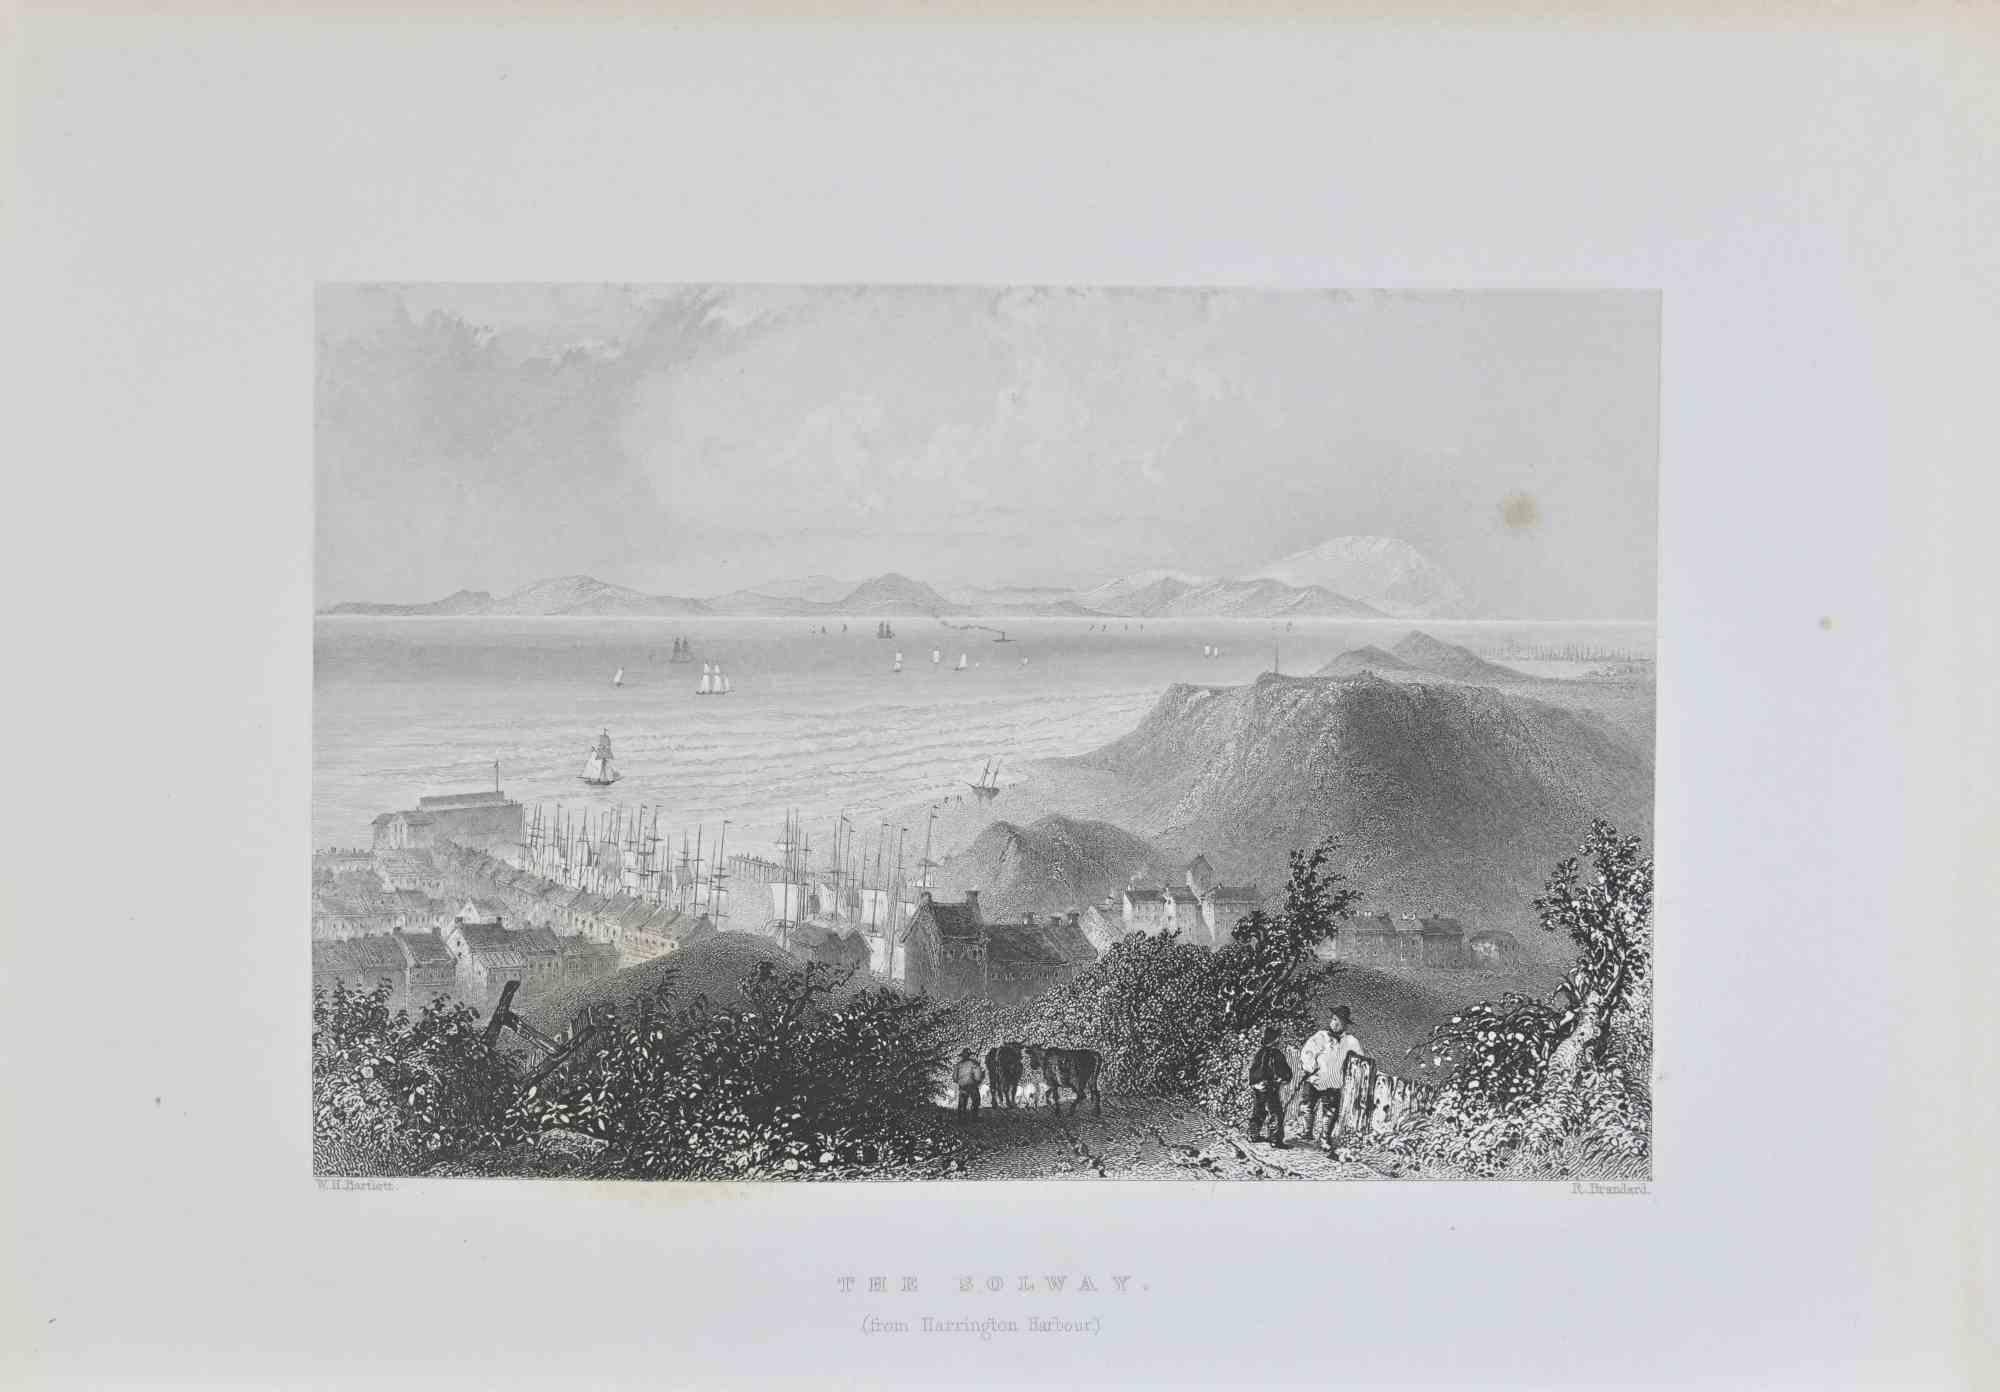 The Solway is an etching realized in 1845 by W. H.Bartlett.

Signed on the plate. 

Titled on the lower center.

Good conditions with slight foxing.

The artwork is beautifully realized in a well-balanced composition through short, deft strokes.